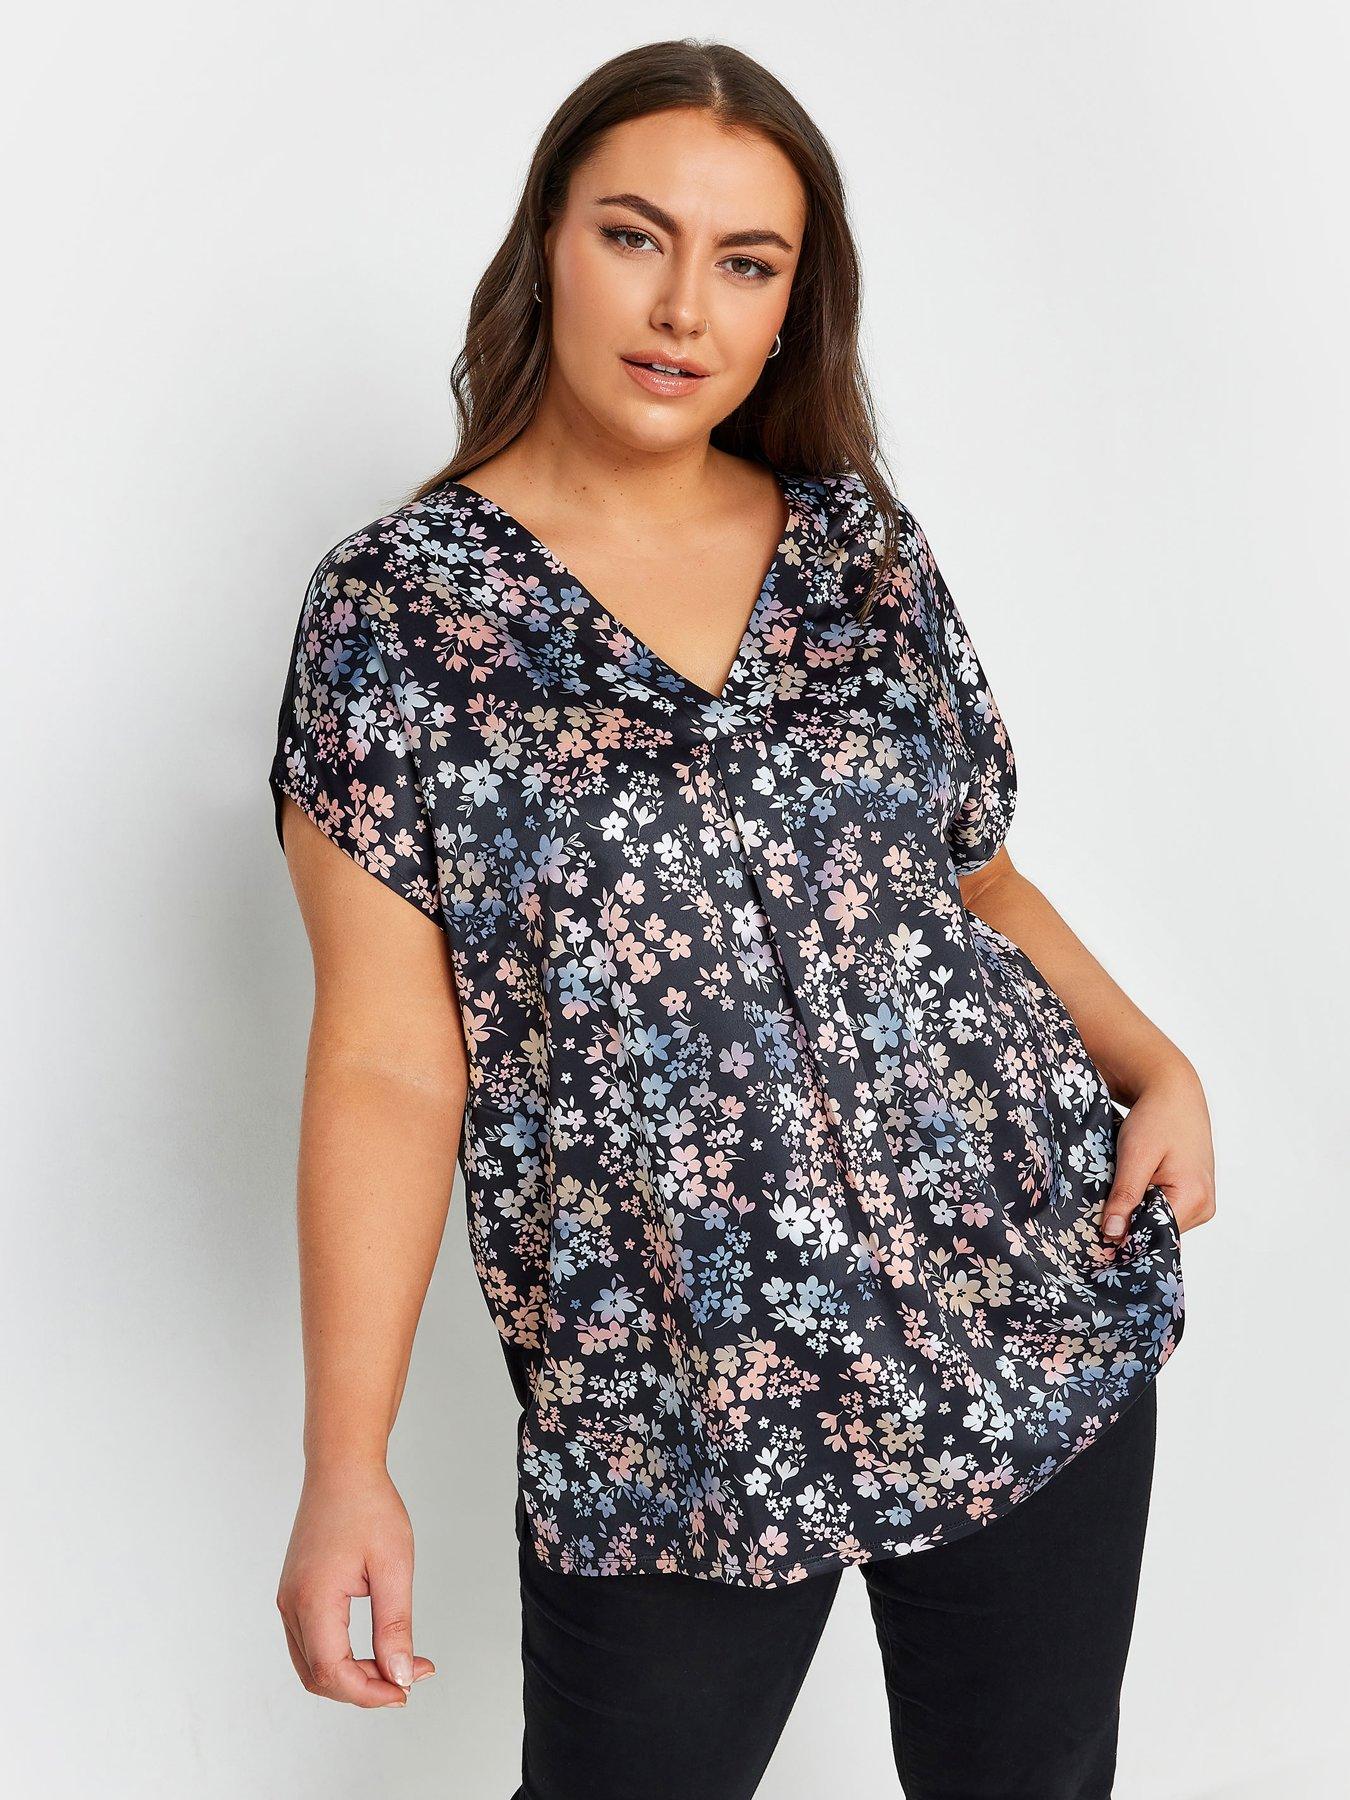 YOURS Plus Size Black Floral Print Long Sleeve Gypsy Tunic Top